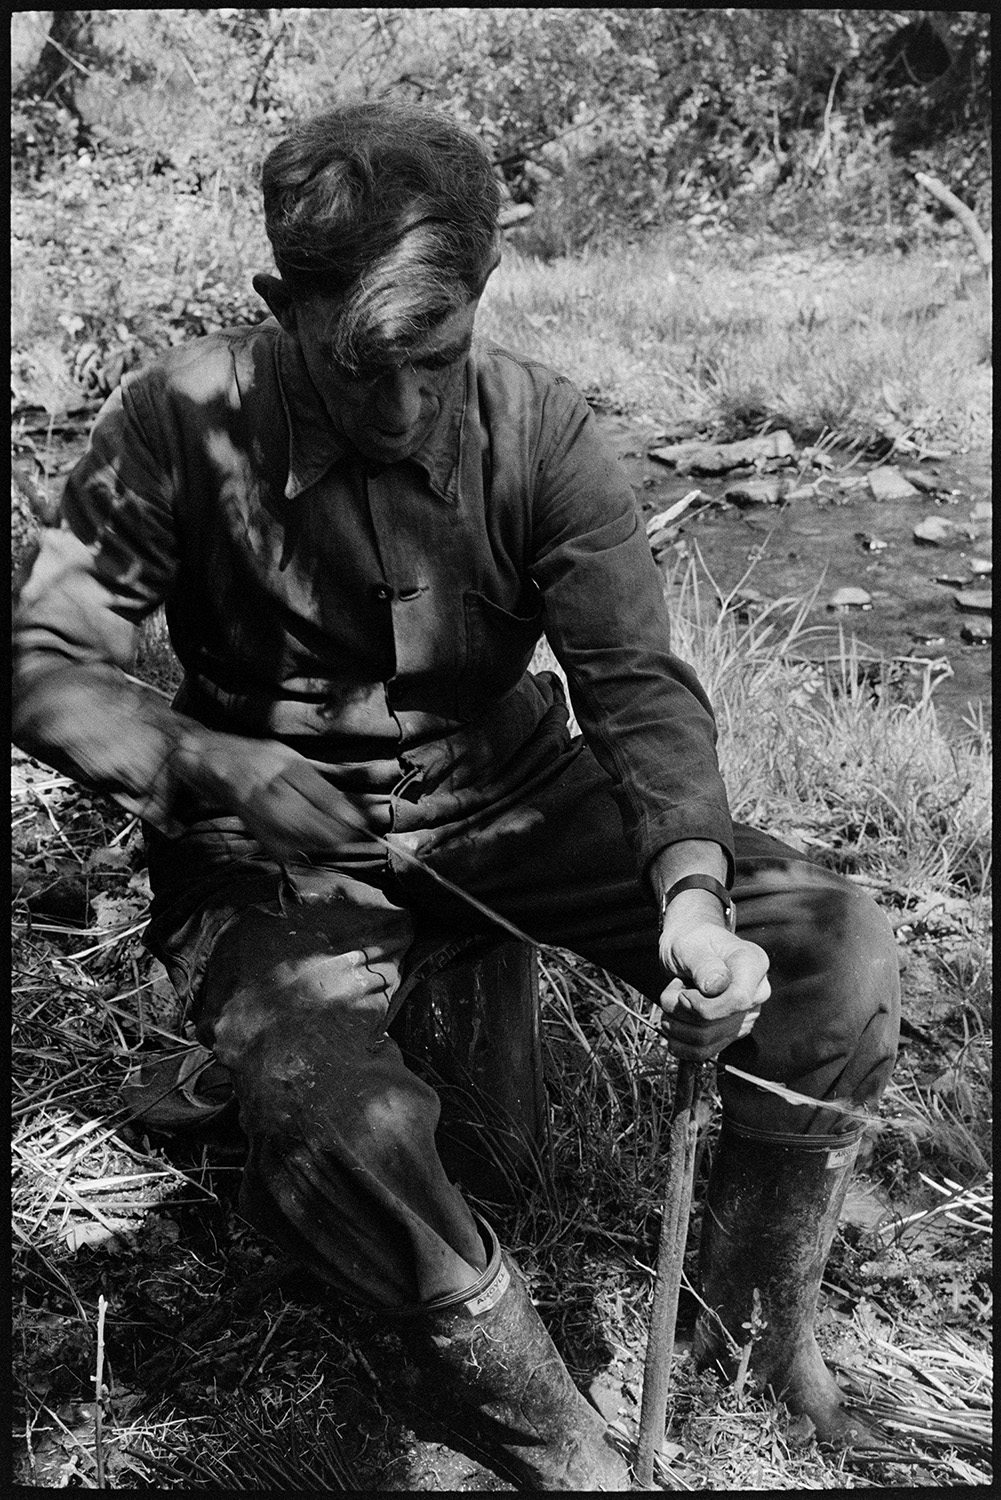 Two skinning (stripping) rods (willows) for basketwork. 
[Bill Folland stripping or skinning a rod of willow to be used in basket making, near a stream at Colehouse, Riddlecombe. He is using a metal tool to strip the willow.]